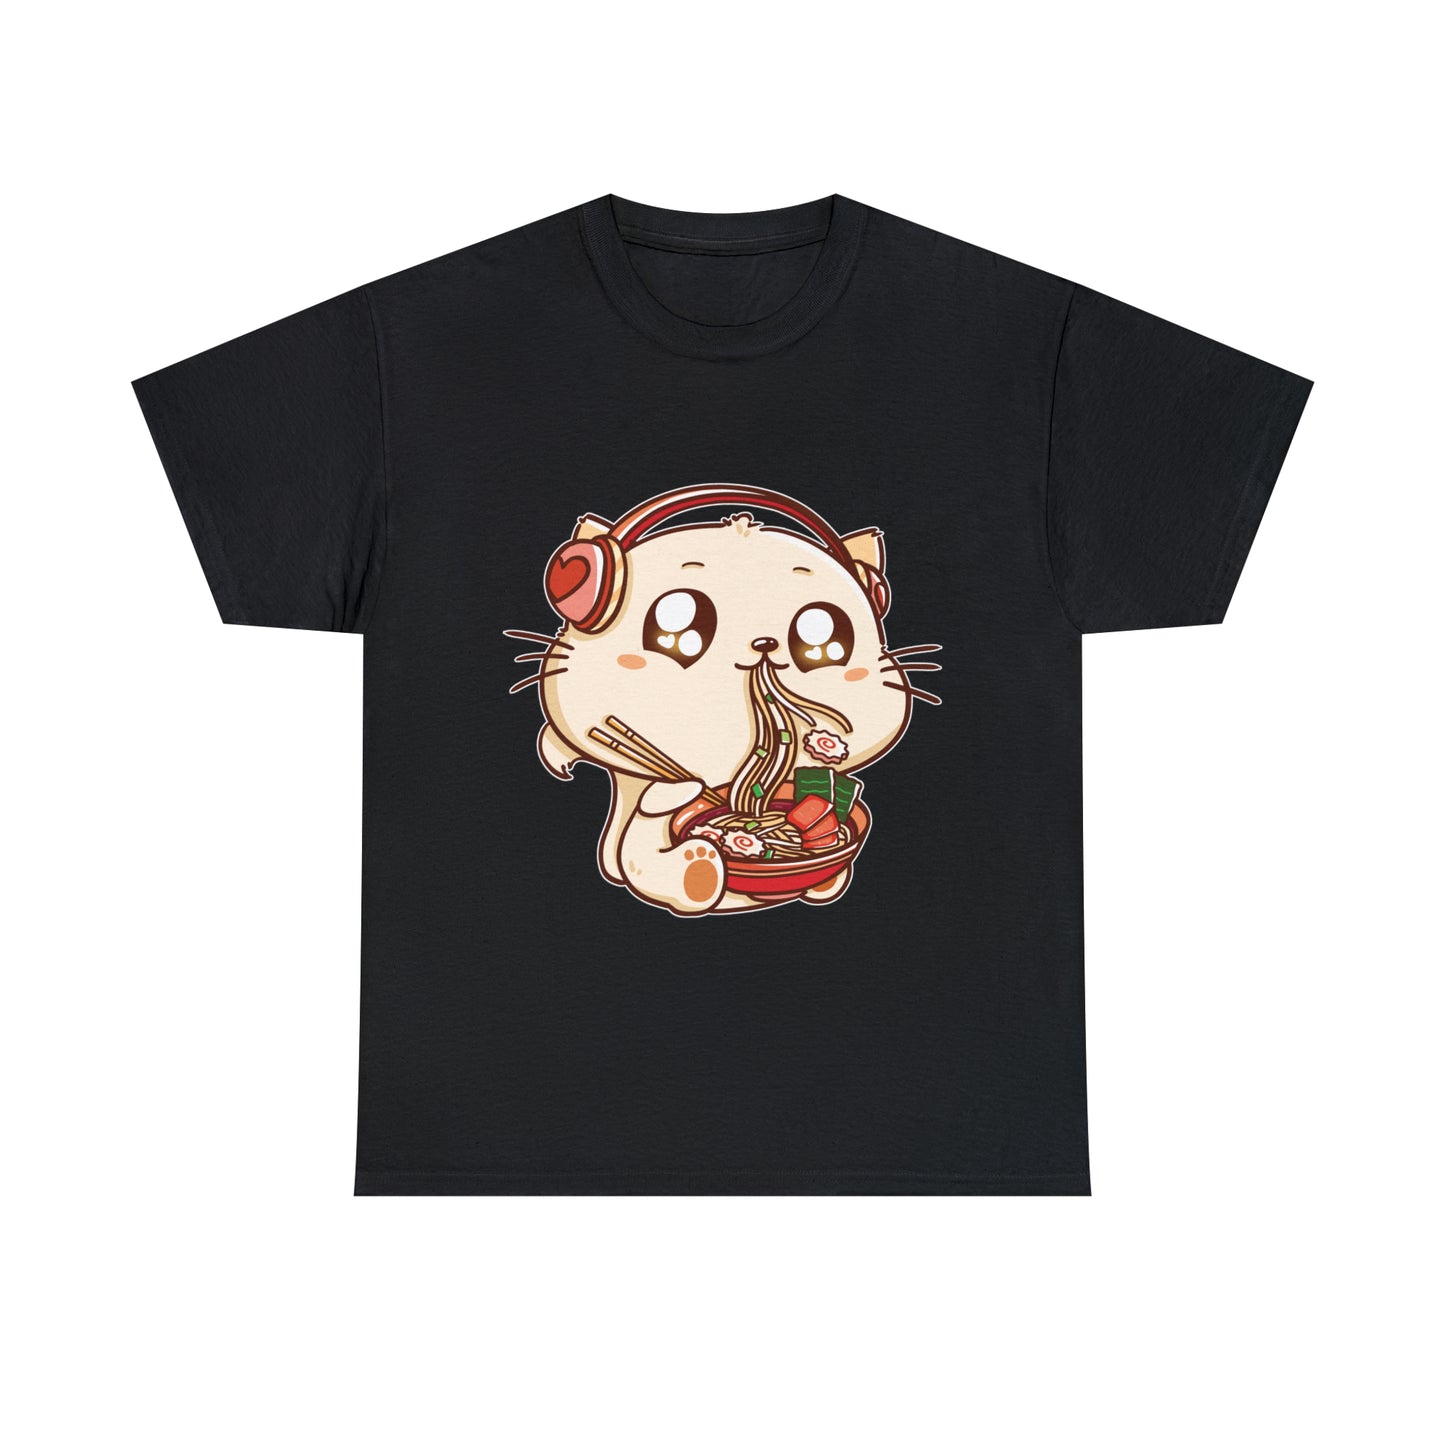 This Might Be The Cutest Cat On A Tshirt You Have Ever Seen! Bonus: It Eats Ramen!